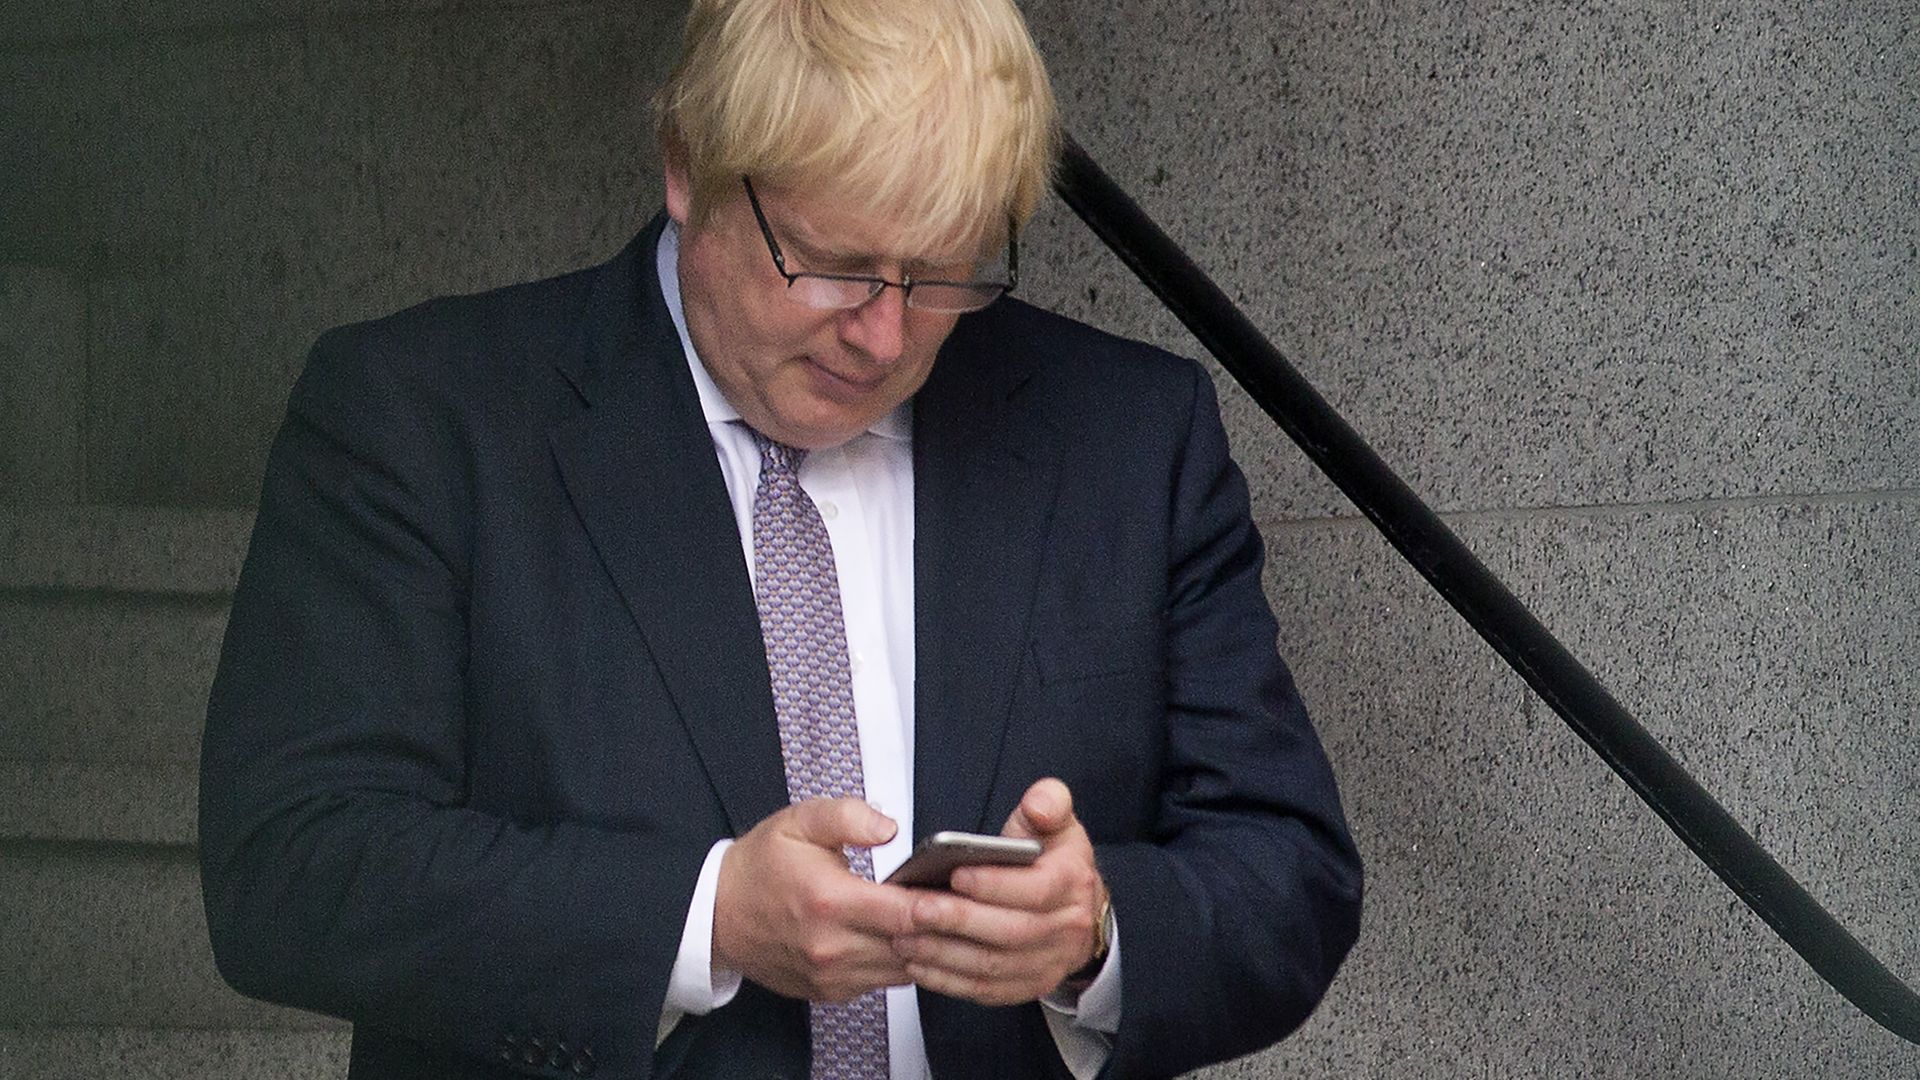 Boris Johnson on a mobile phone, June 2016 - Credit: Photo by JUSTIN TALLIS/AFP via Getty Images